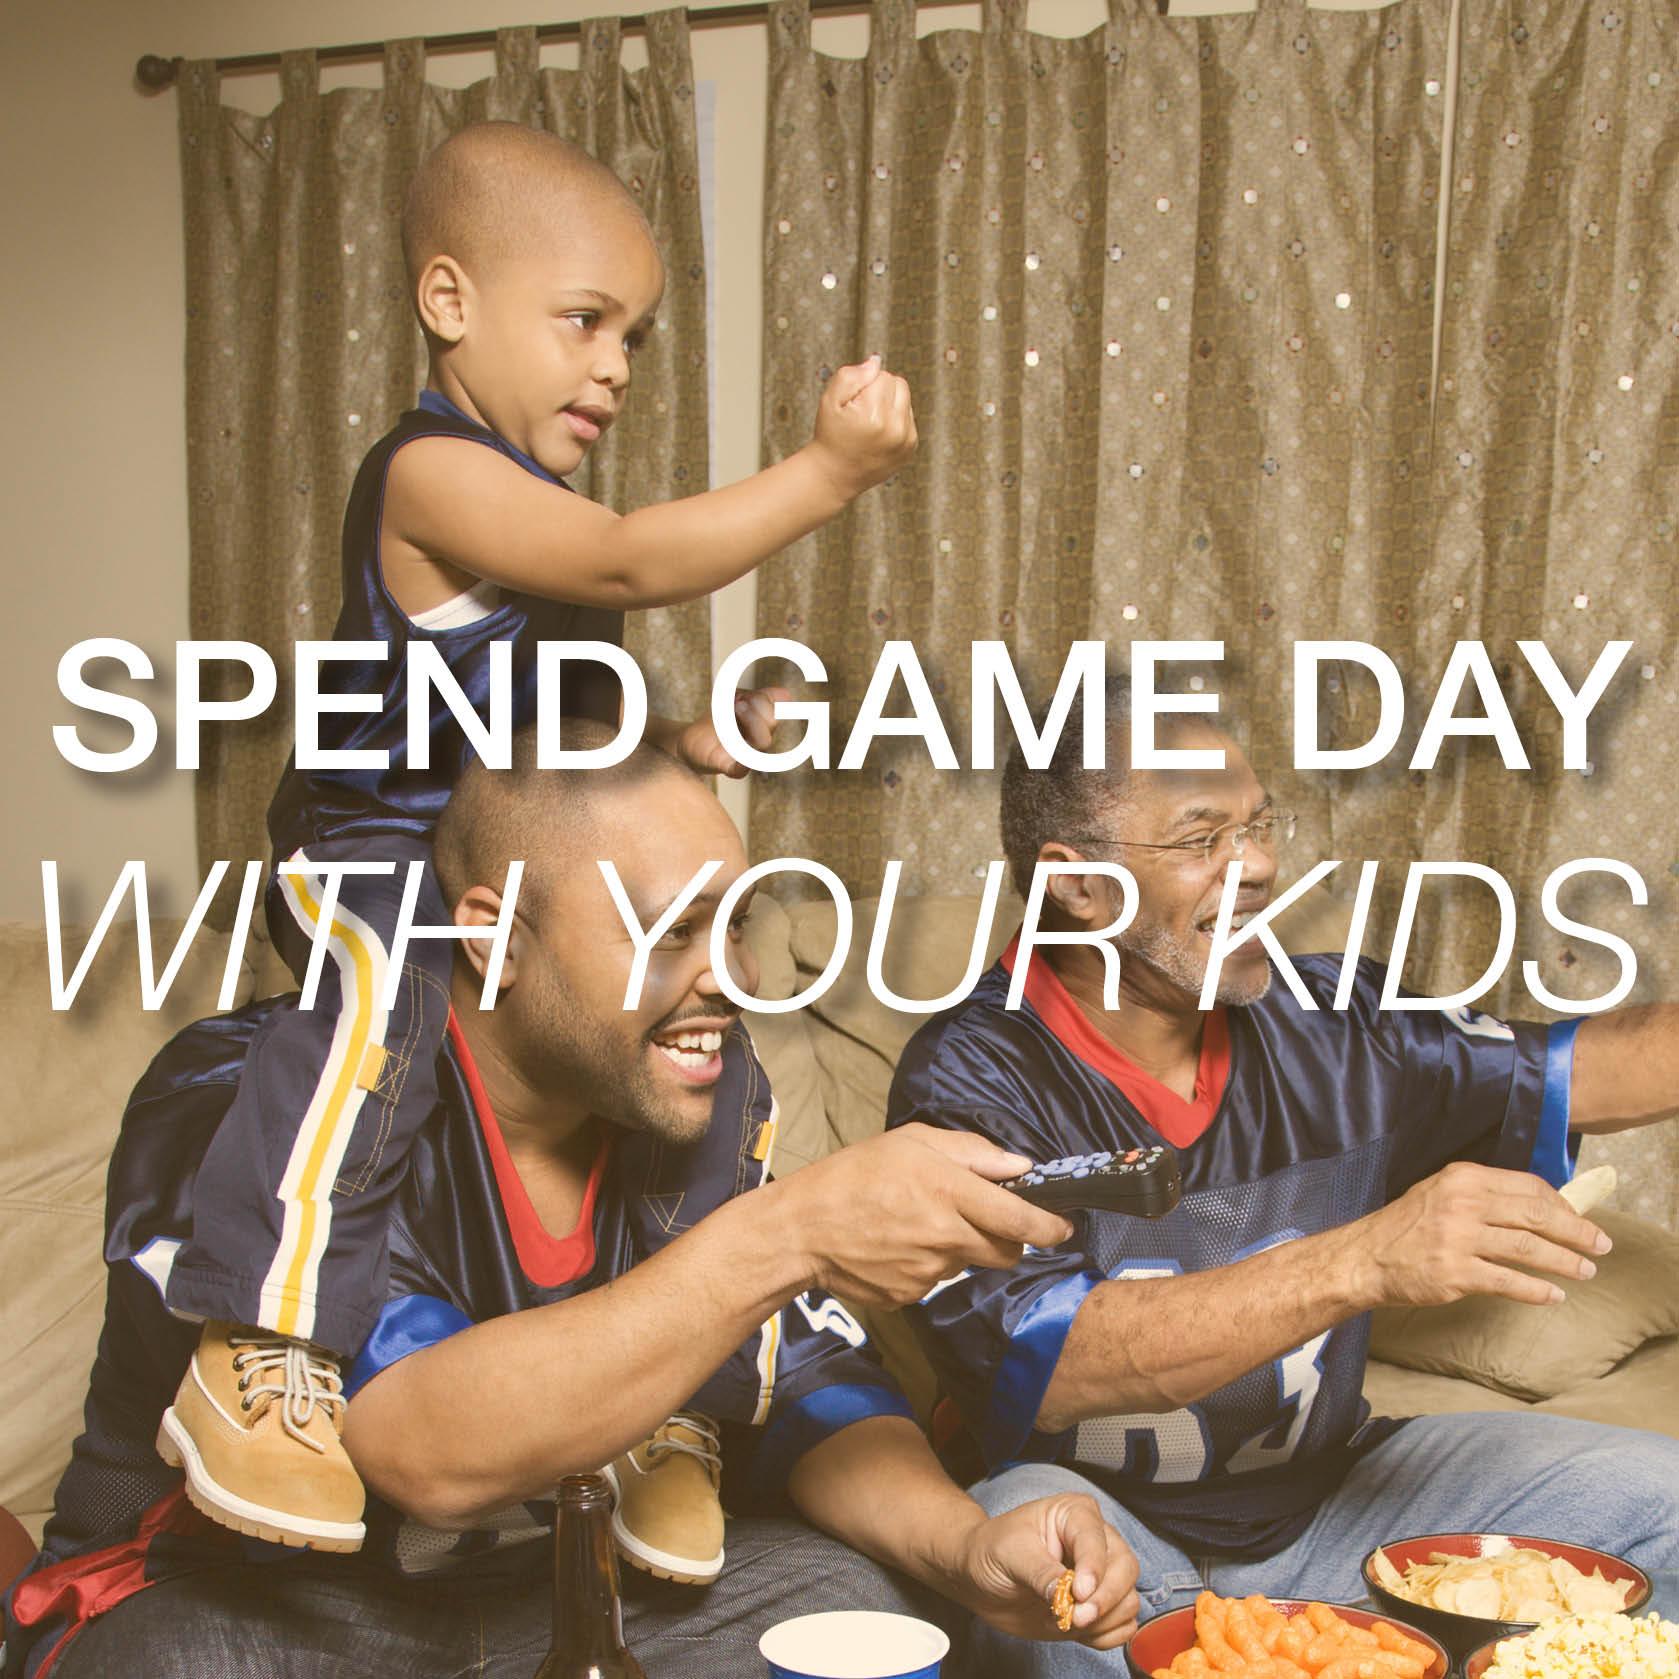 QT30: Make Game Day, Family Day!